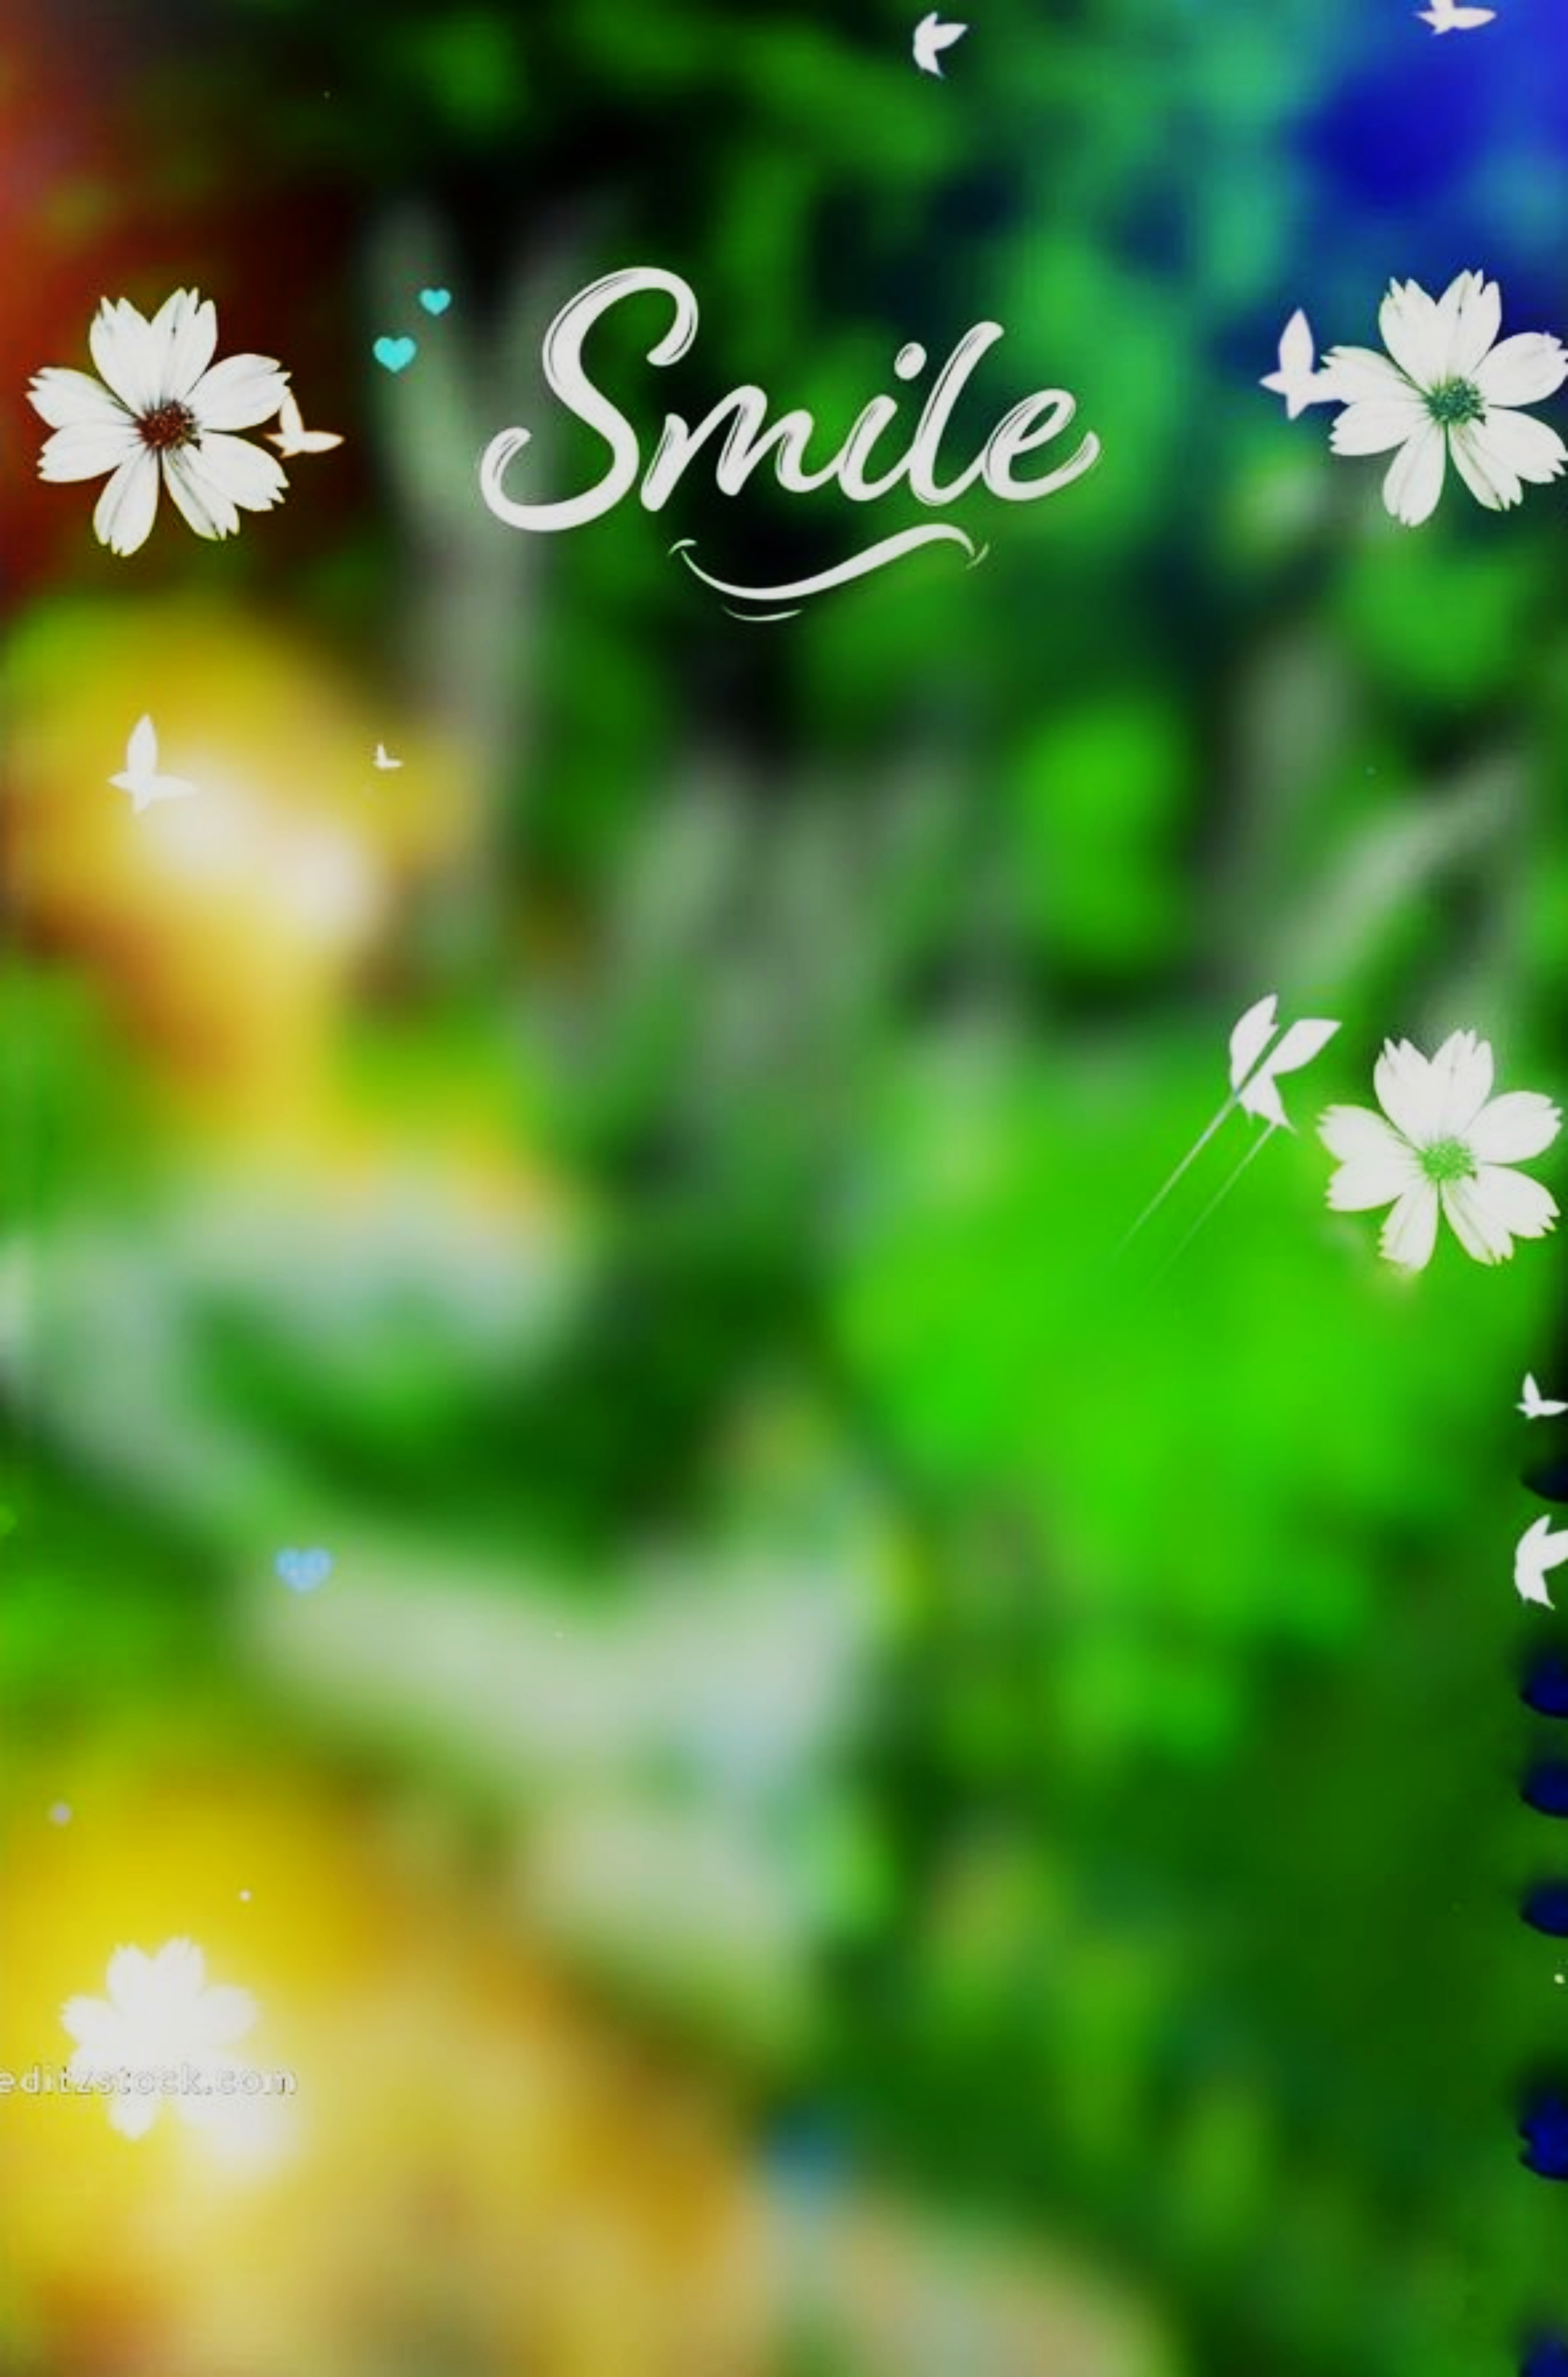 You are currently viewing Smile cb background hd download free